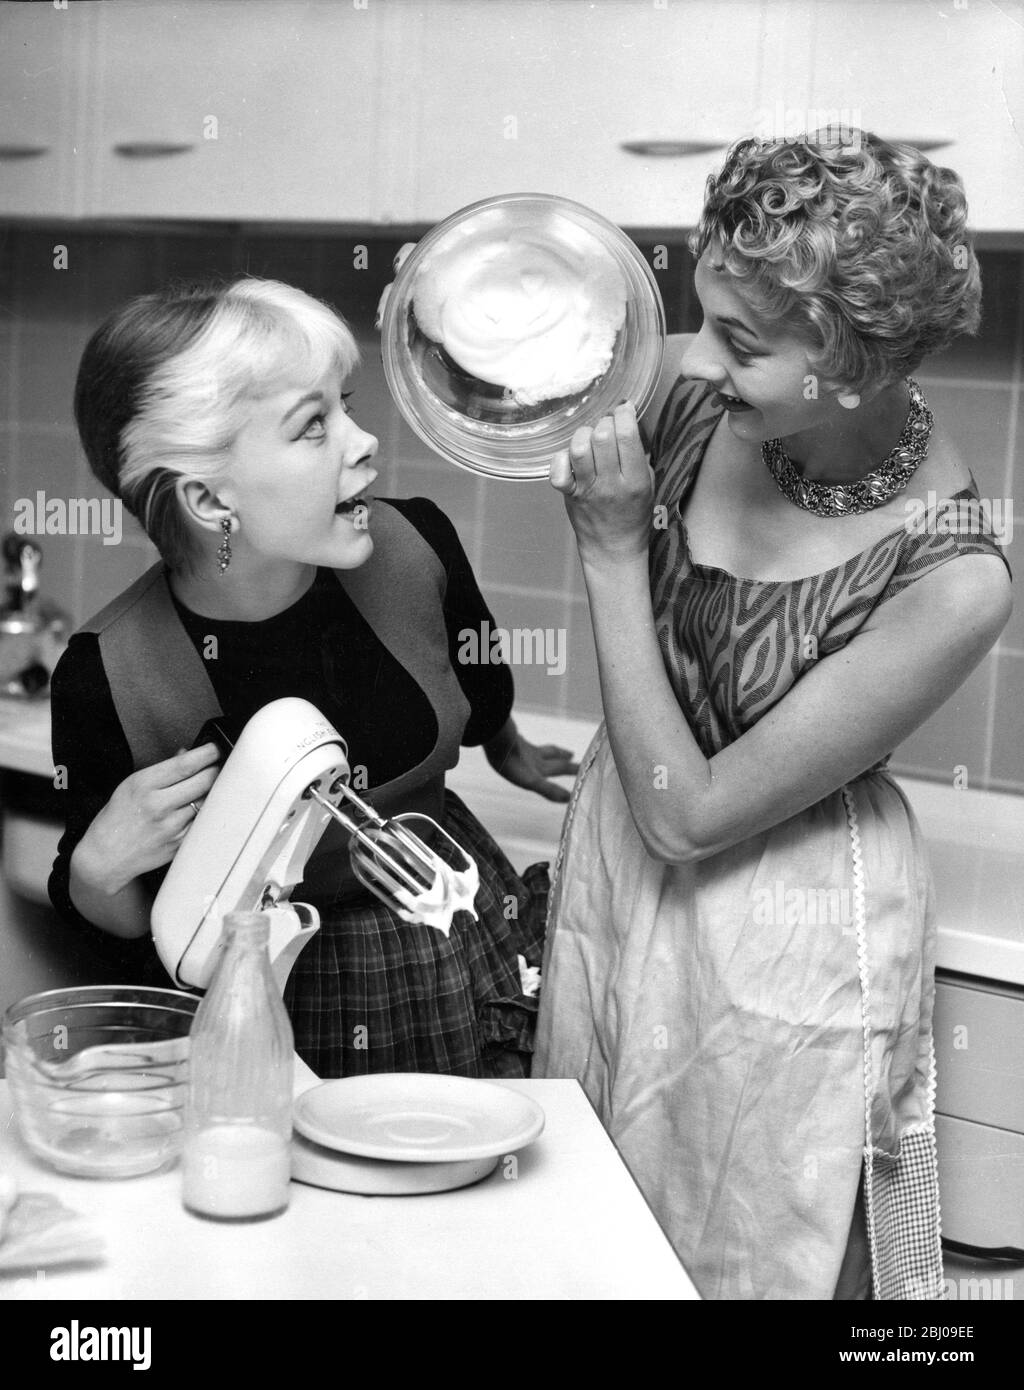 Model Zoe Newton , 18 , the  Milk Girl  whose smiling face on advertisements has made her familiar to millions is seen here (left) getting some culinary tips from Children's Television cookery expert Jacqueline Rose . Jacky is showing her how the whipped-up egg whites stay in a upturned bowl when the eggs have been beaten to the correct consistency . - 26 August 1954 Stock Photo